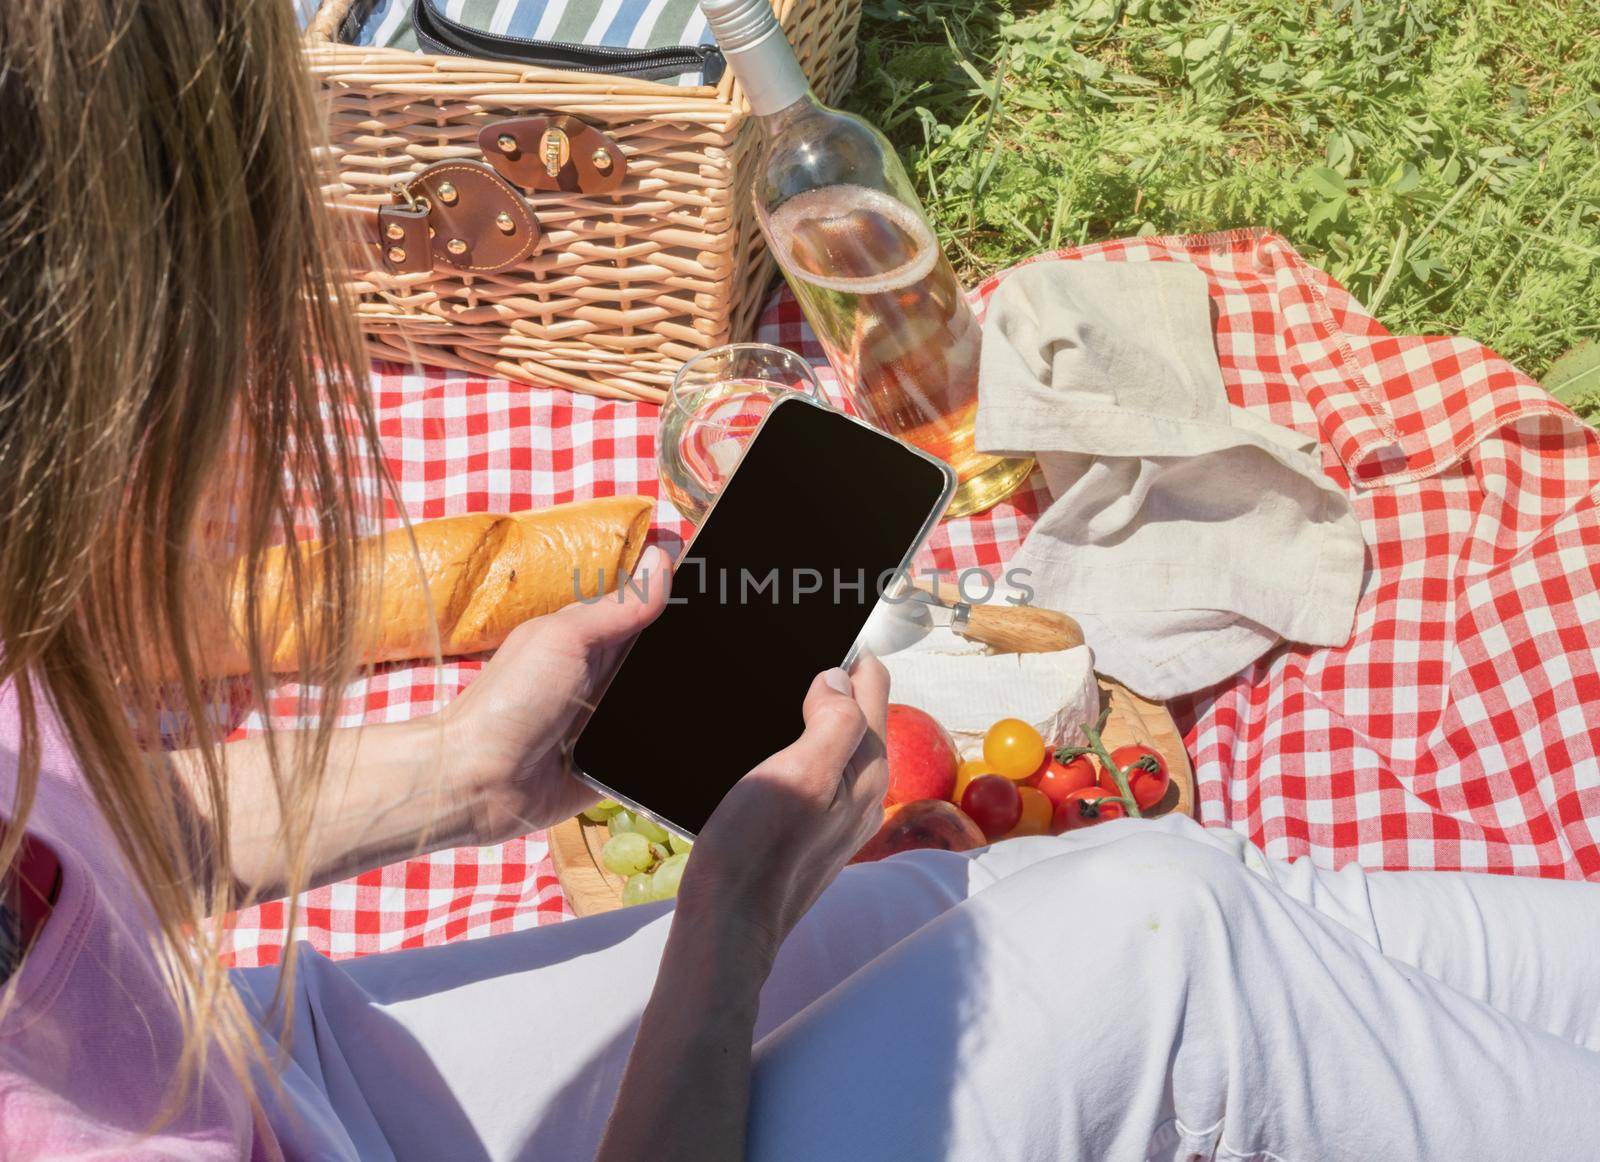 back view of unrecognizable woman in white pants outside having picnic and using smartphone taking photo by Desperada